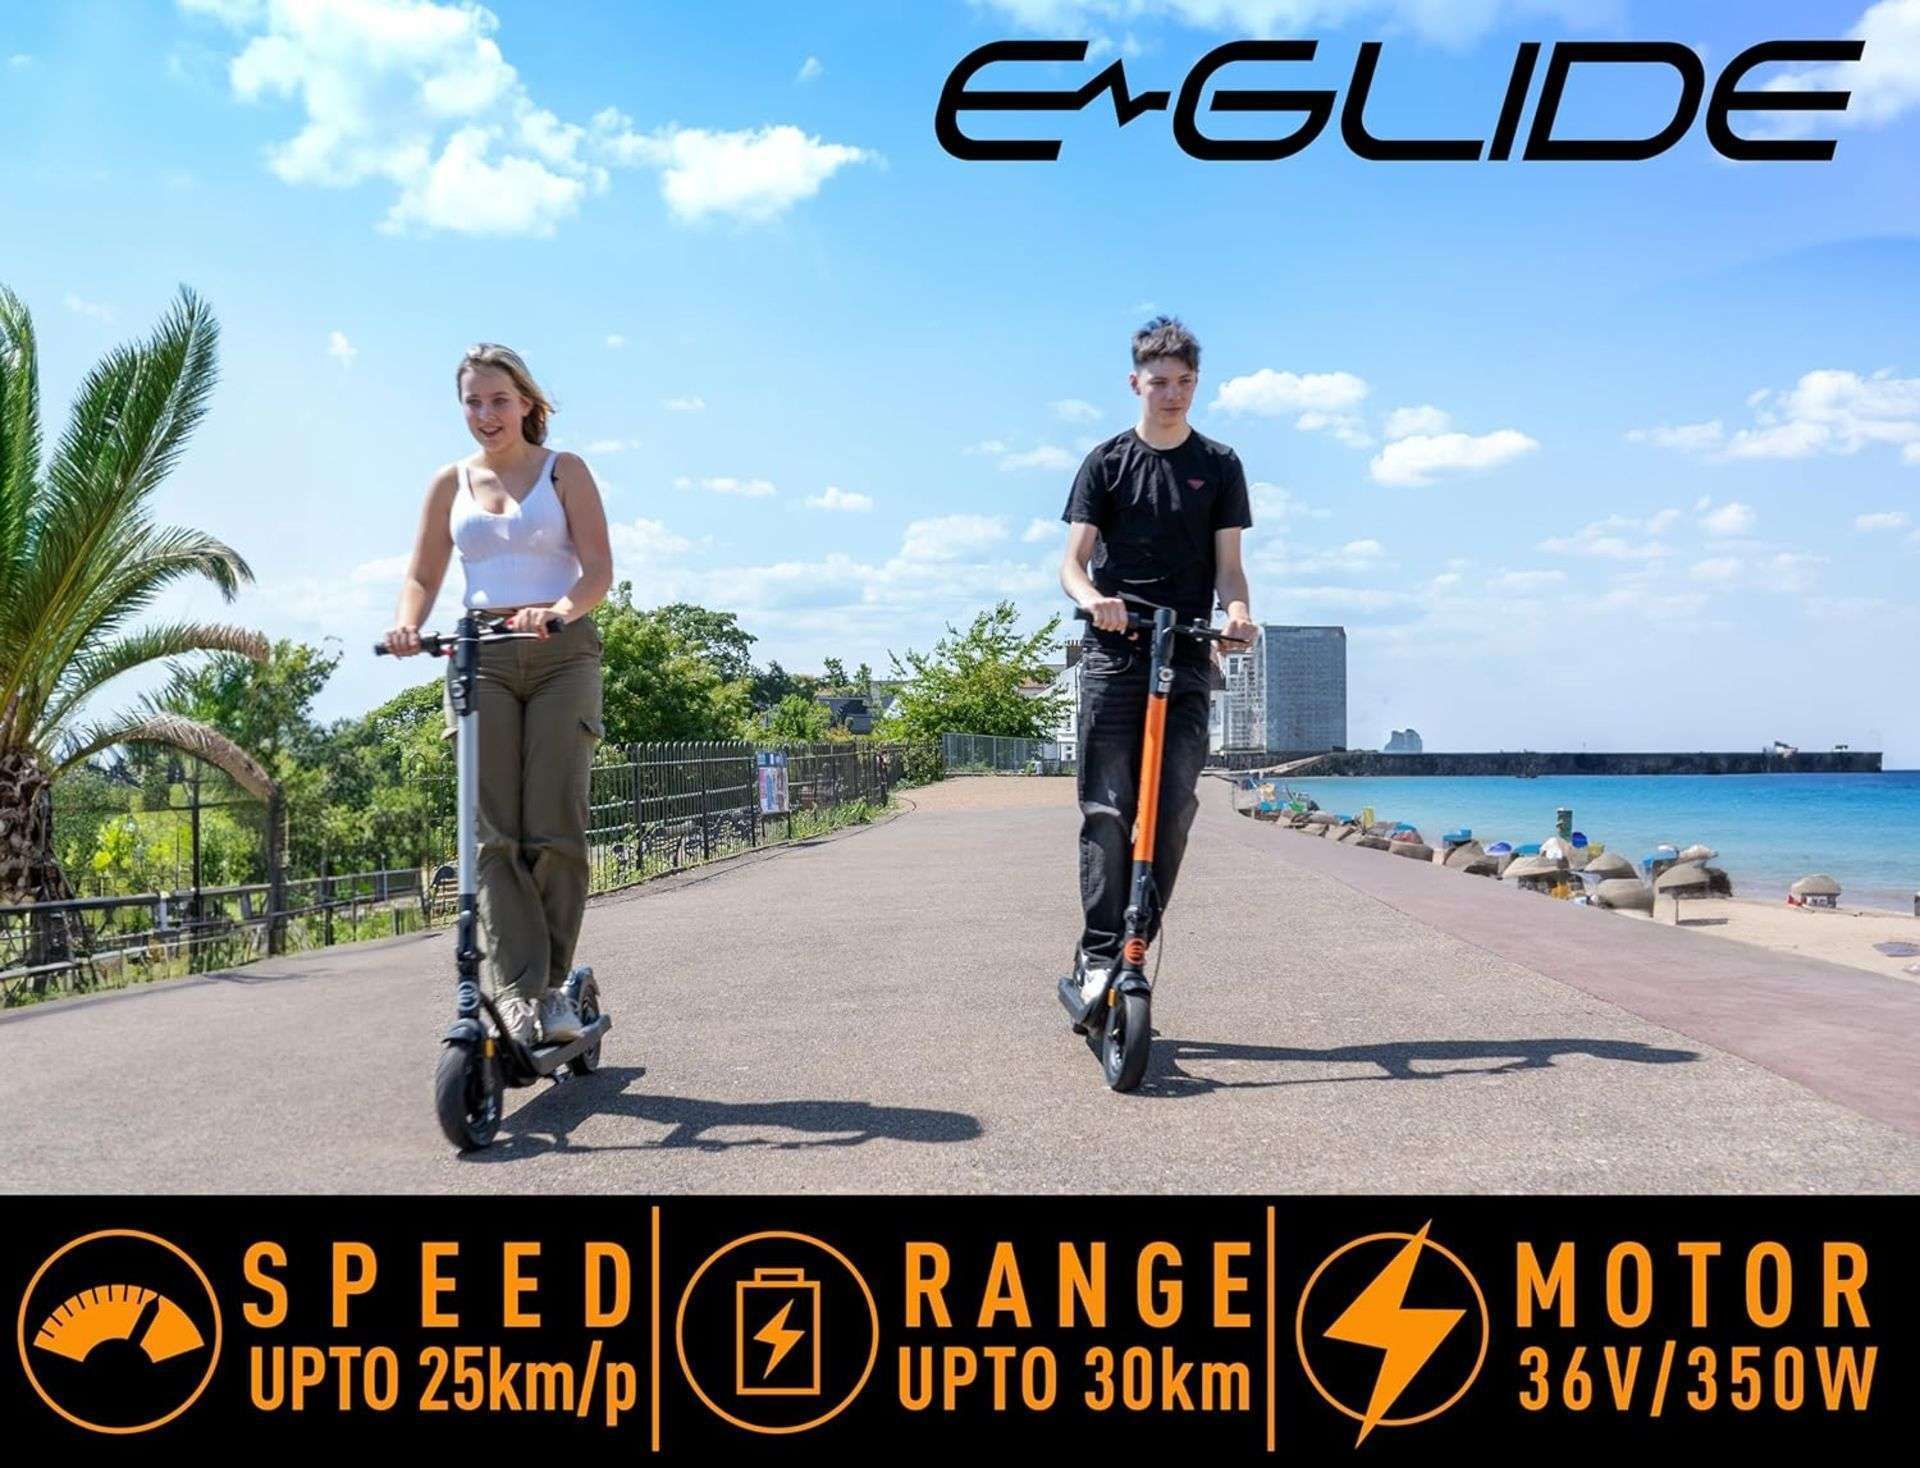 Brand New E-Glide V2 Electric Scooter Grey and Black RRP £599, Introducing a sleek and efficient - Bild 3 aus 4